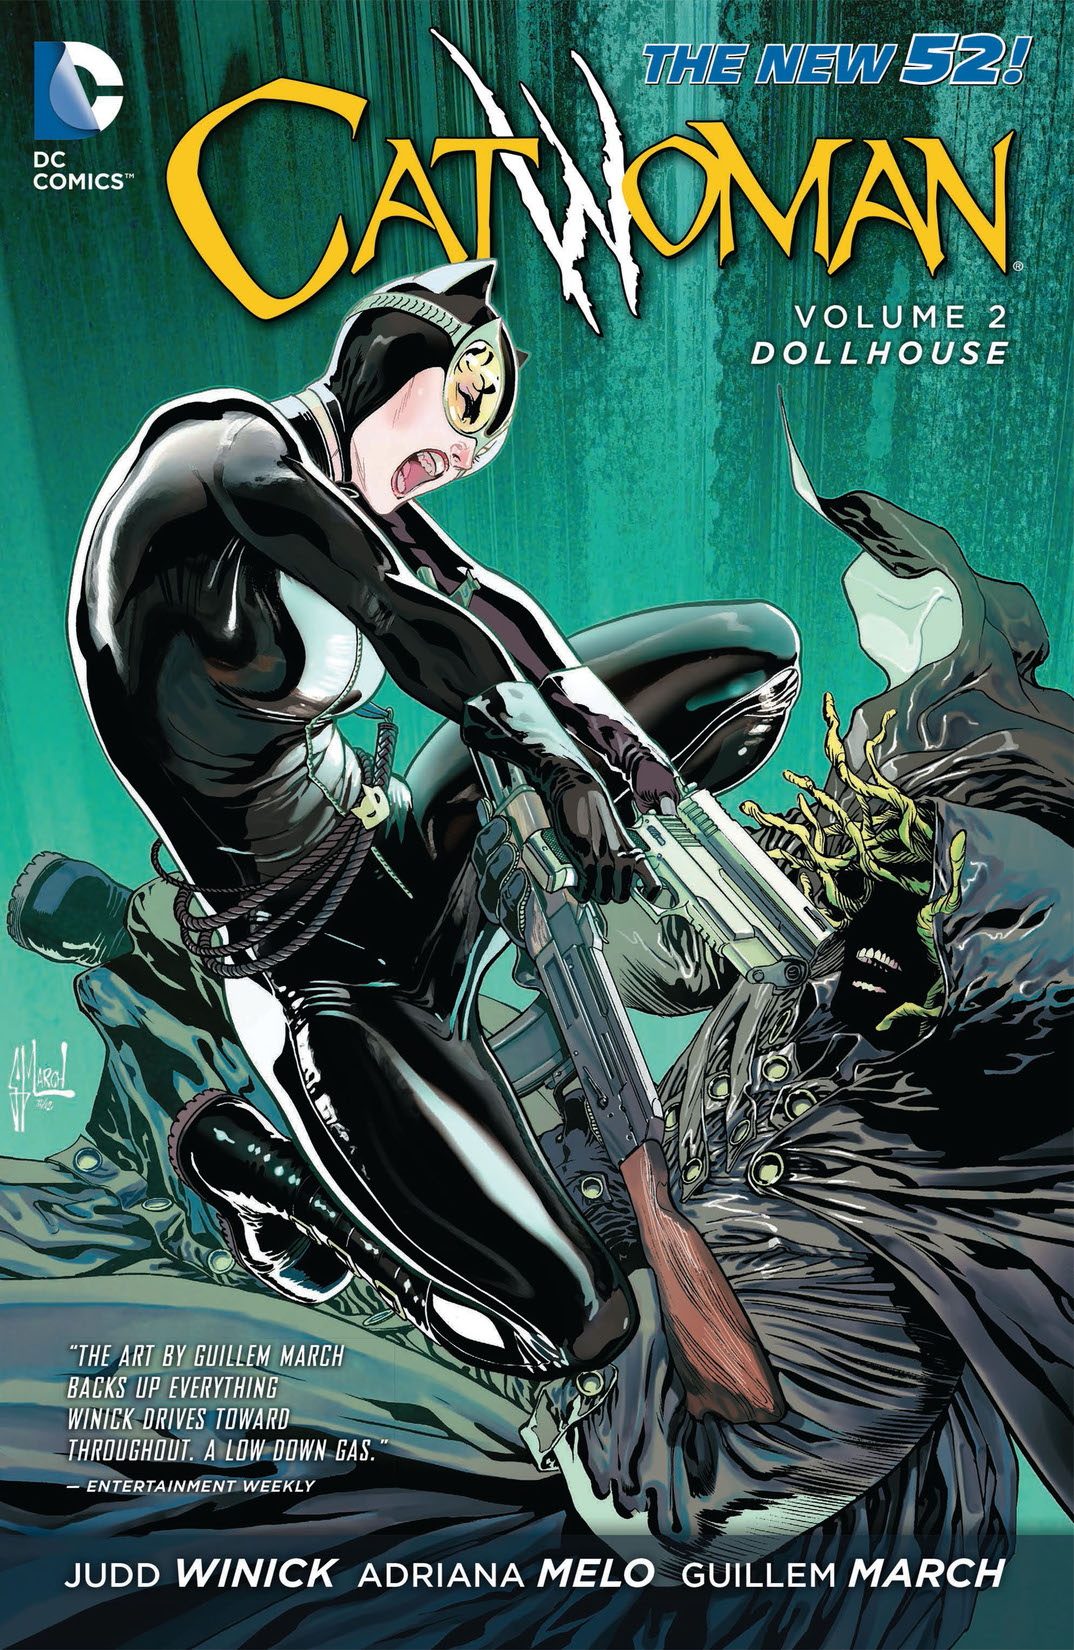 Catwoman Vol. 2: Dollhouse preview images